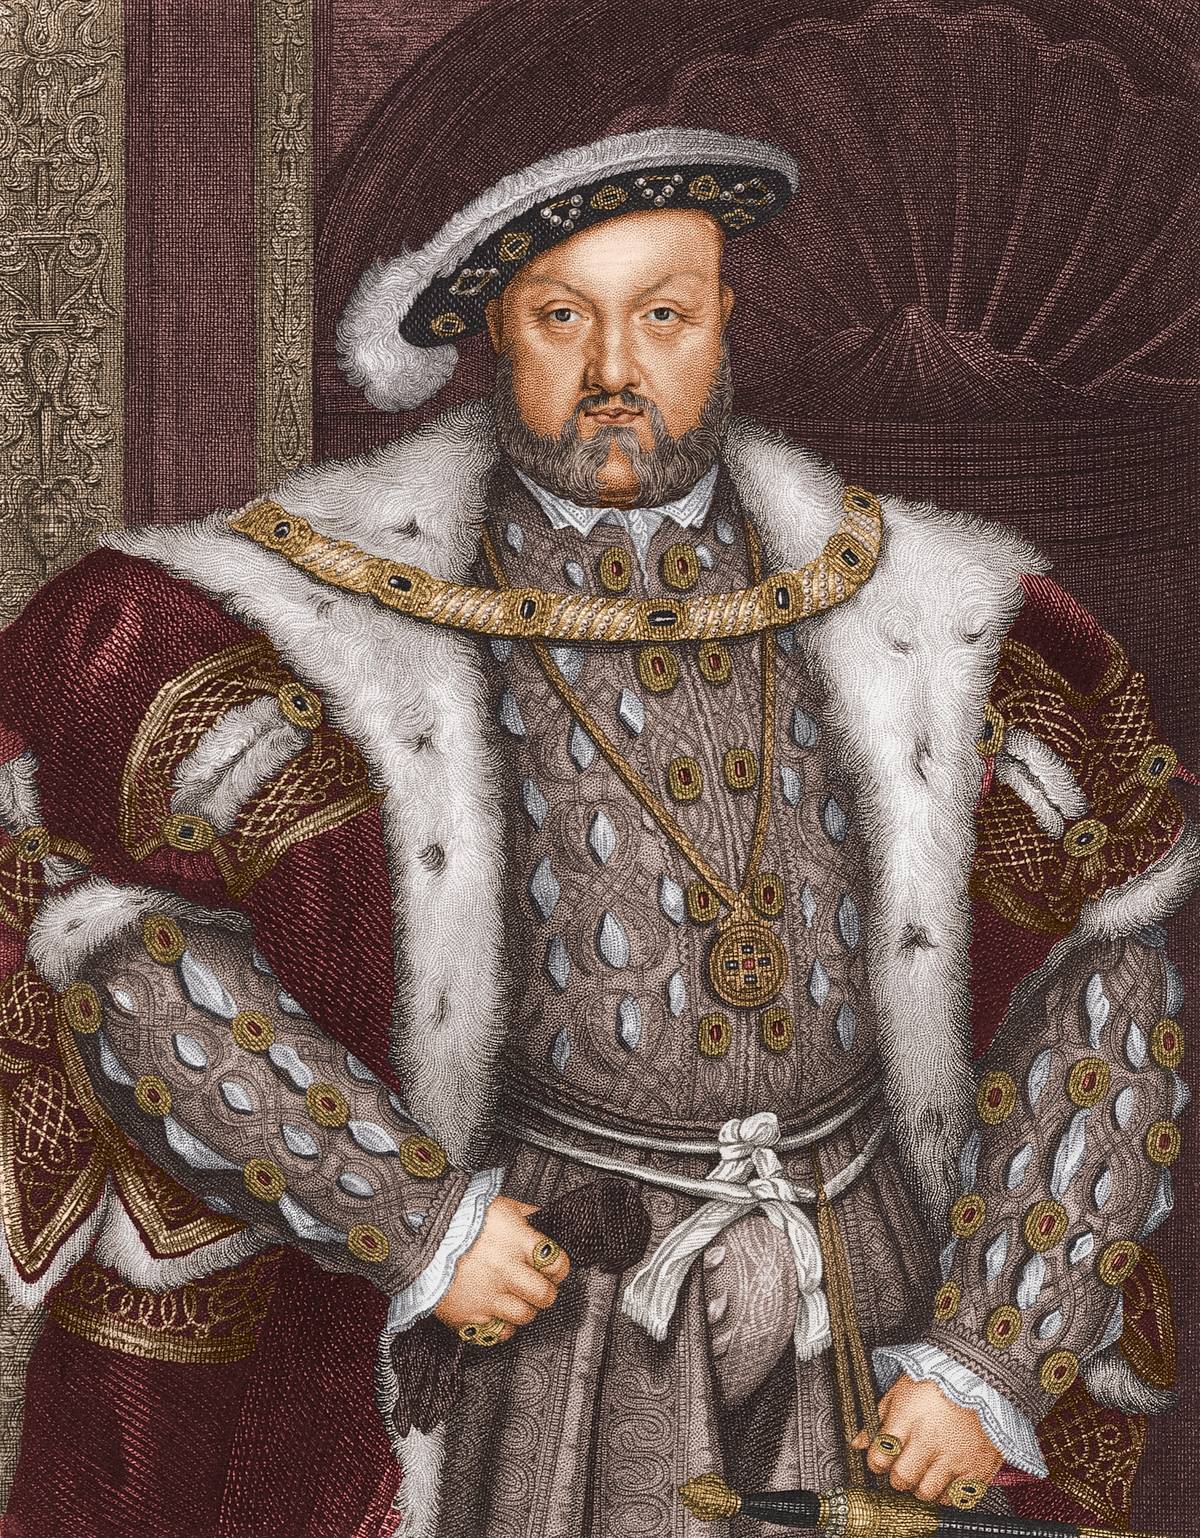 <p>King Henry VIII might be known for his six marriages, but nothing was quite like his fourth. When choosing wife number four, he did nothing more than look at a painting and point at the woman he wanted to marry. No need for traditional courtship here!</p> <p>The thing is, once he saw Anne of Cleeves, King Henry VIII was taken aback because she didn't look like she didn't in the painting (shocking). Their marriage was very brief.</p>